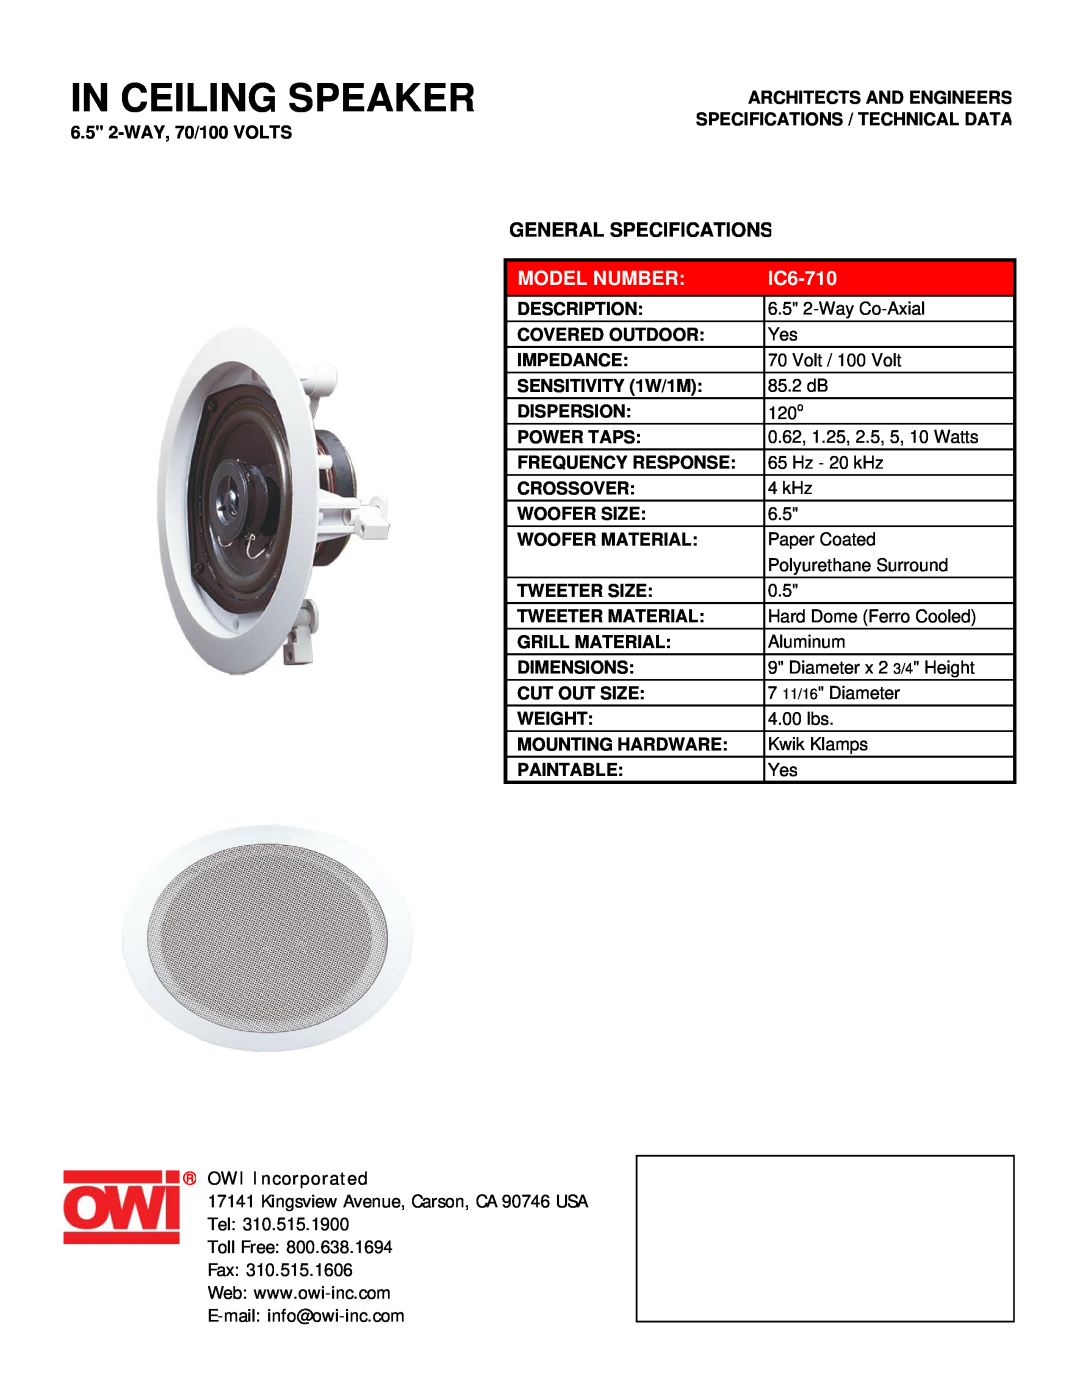 OWI IC6-710 specifications In Ceiling Speaker, General Specifications, Model Number, OWI Incorporated 